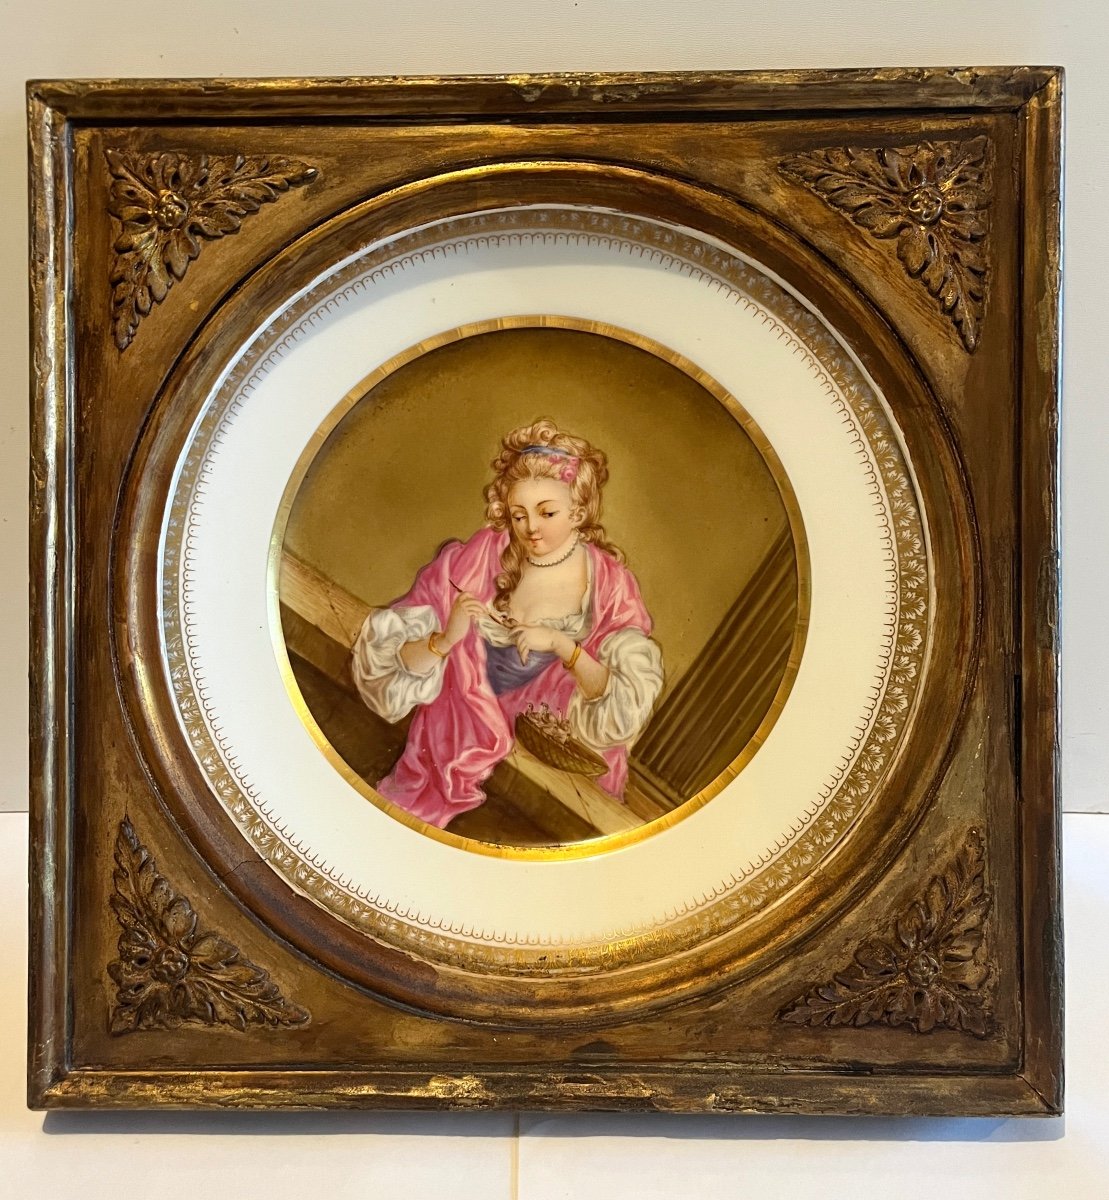 Sèvres Porcelain Plate 19th Century In A Golden Wood Frame-photo-1